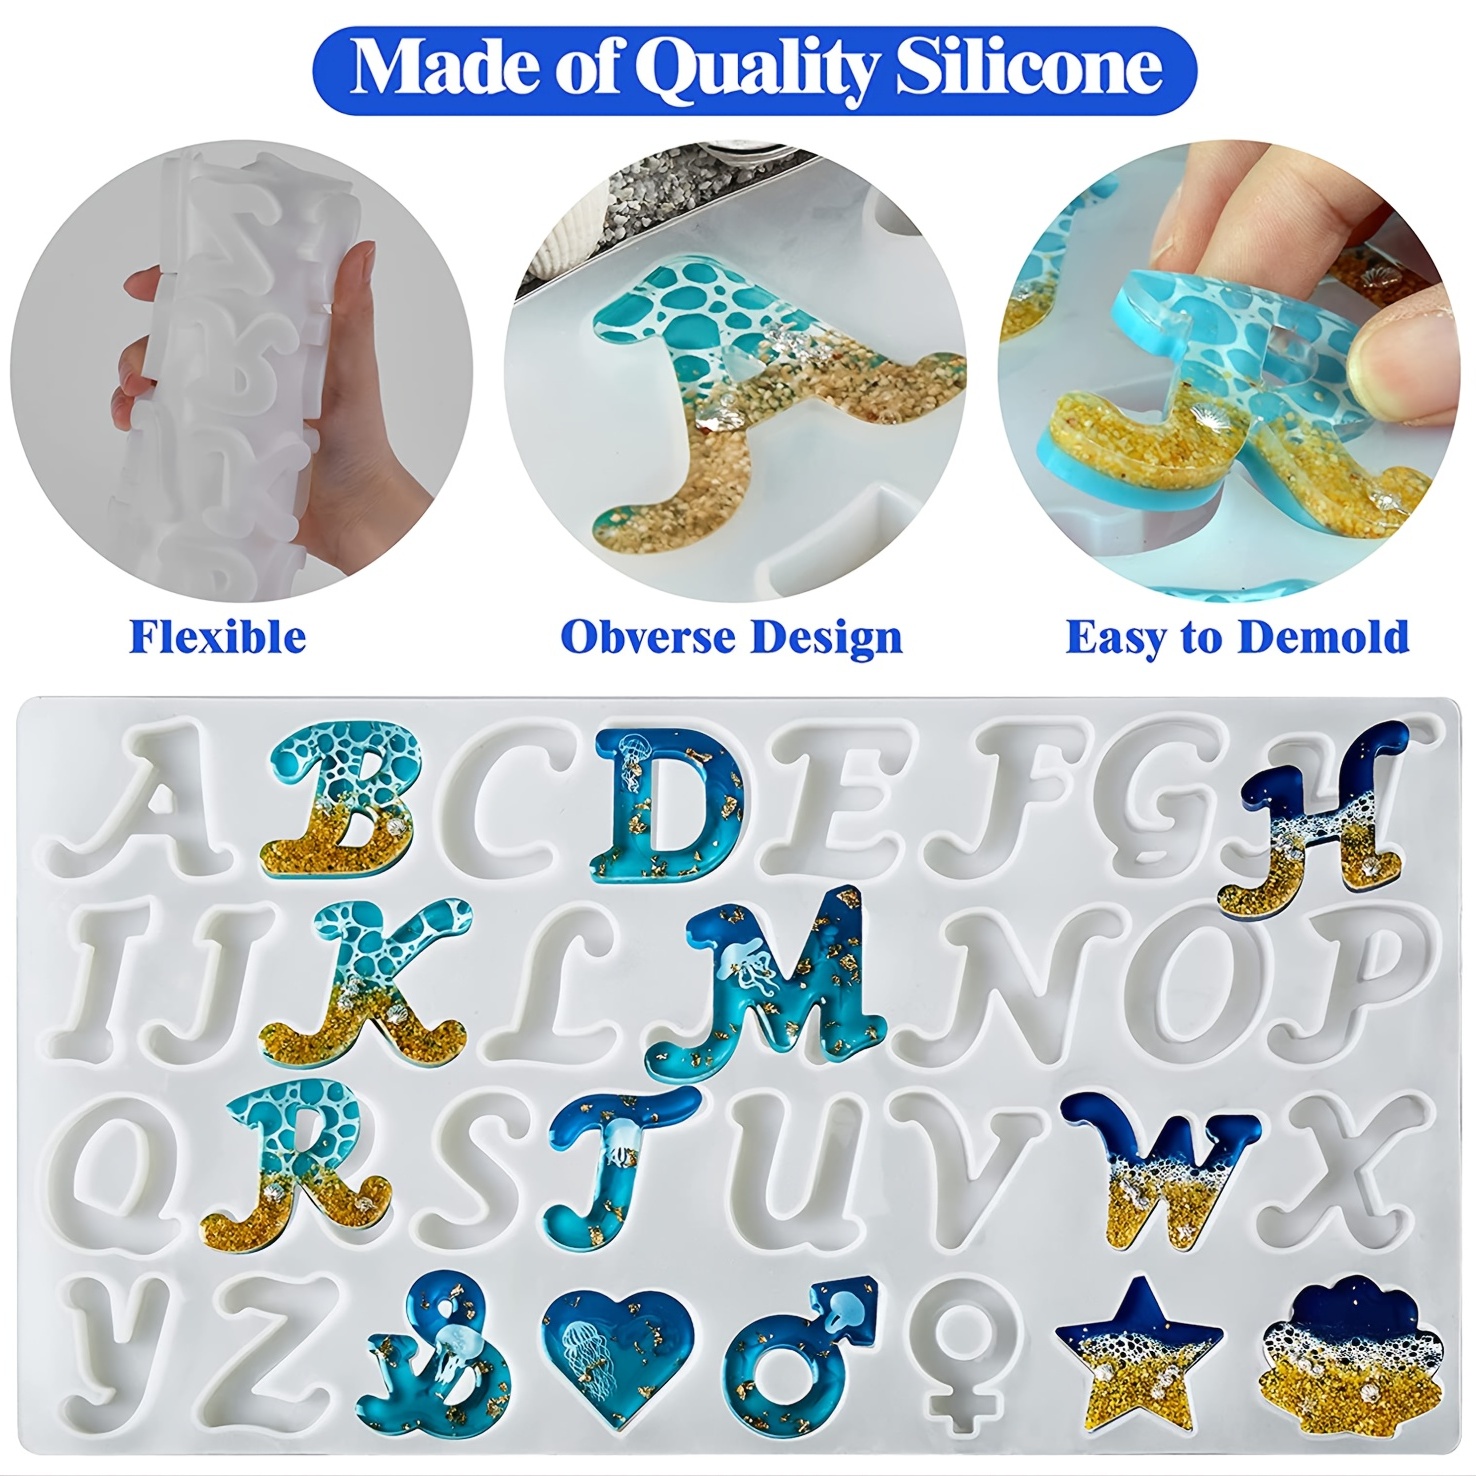 shynek Resin Keychain Molds, Shynek Silicone Resin Kit with Alphabet Mold,  Epoxy Resin, Keychain Tassels and Pin Vise Set for Resin